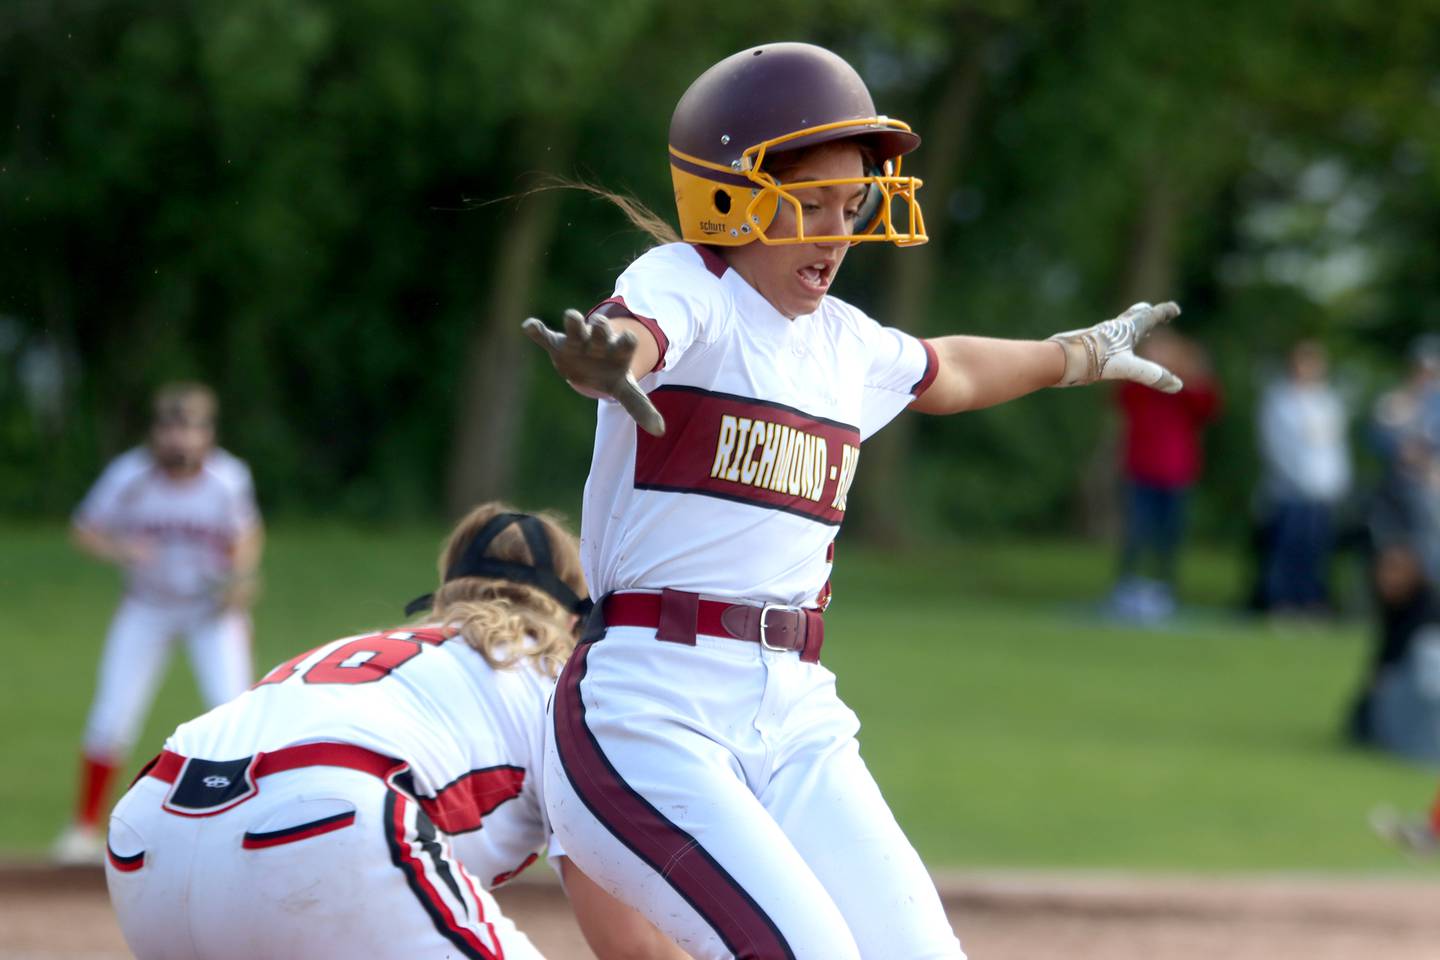 Richmond-Burton’s Adriana Portera signals safe as she glides across first base with a bunt single against Stillman Valley in softball sectional title game action in Richmond Friday evening.